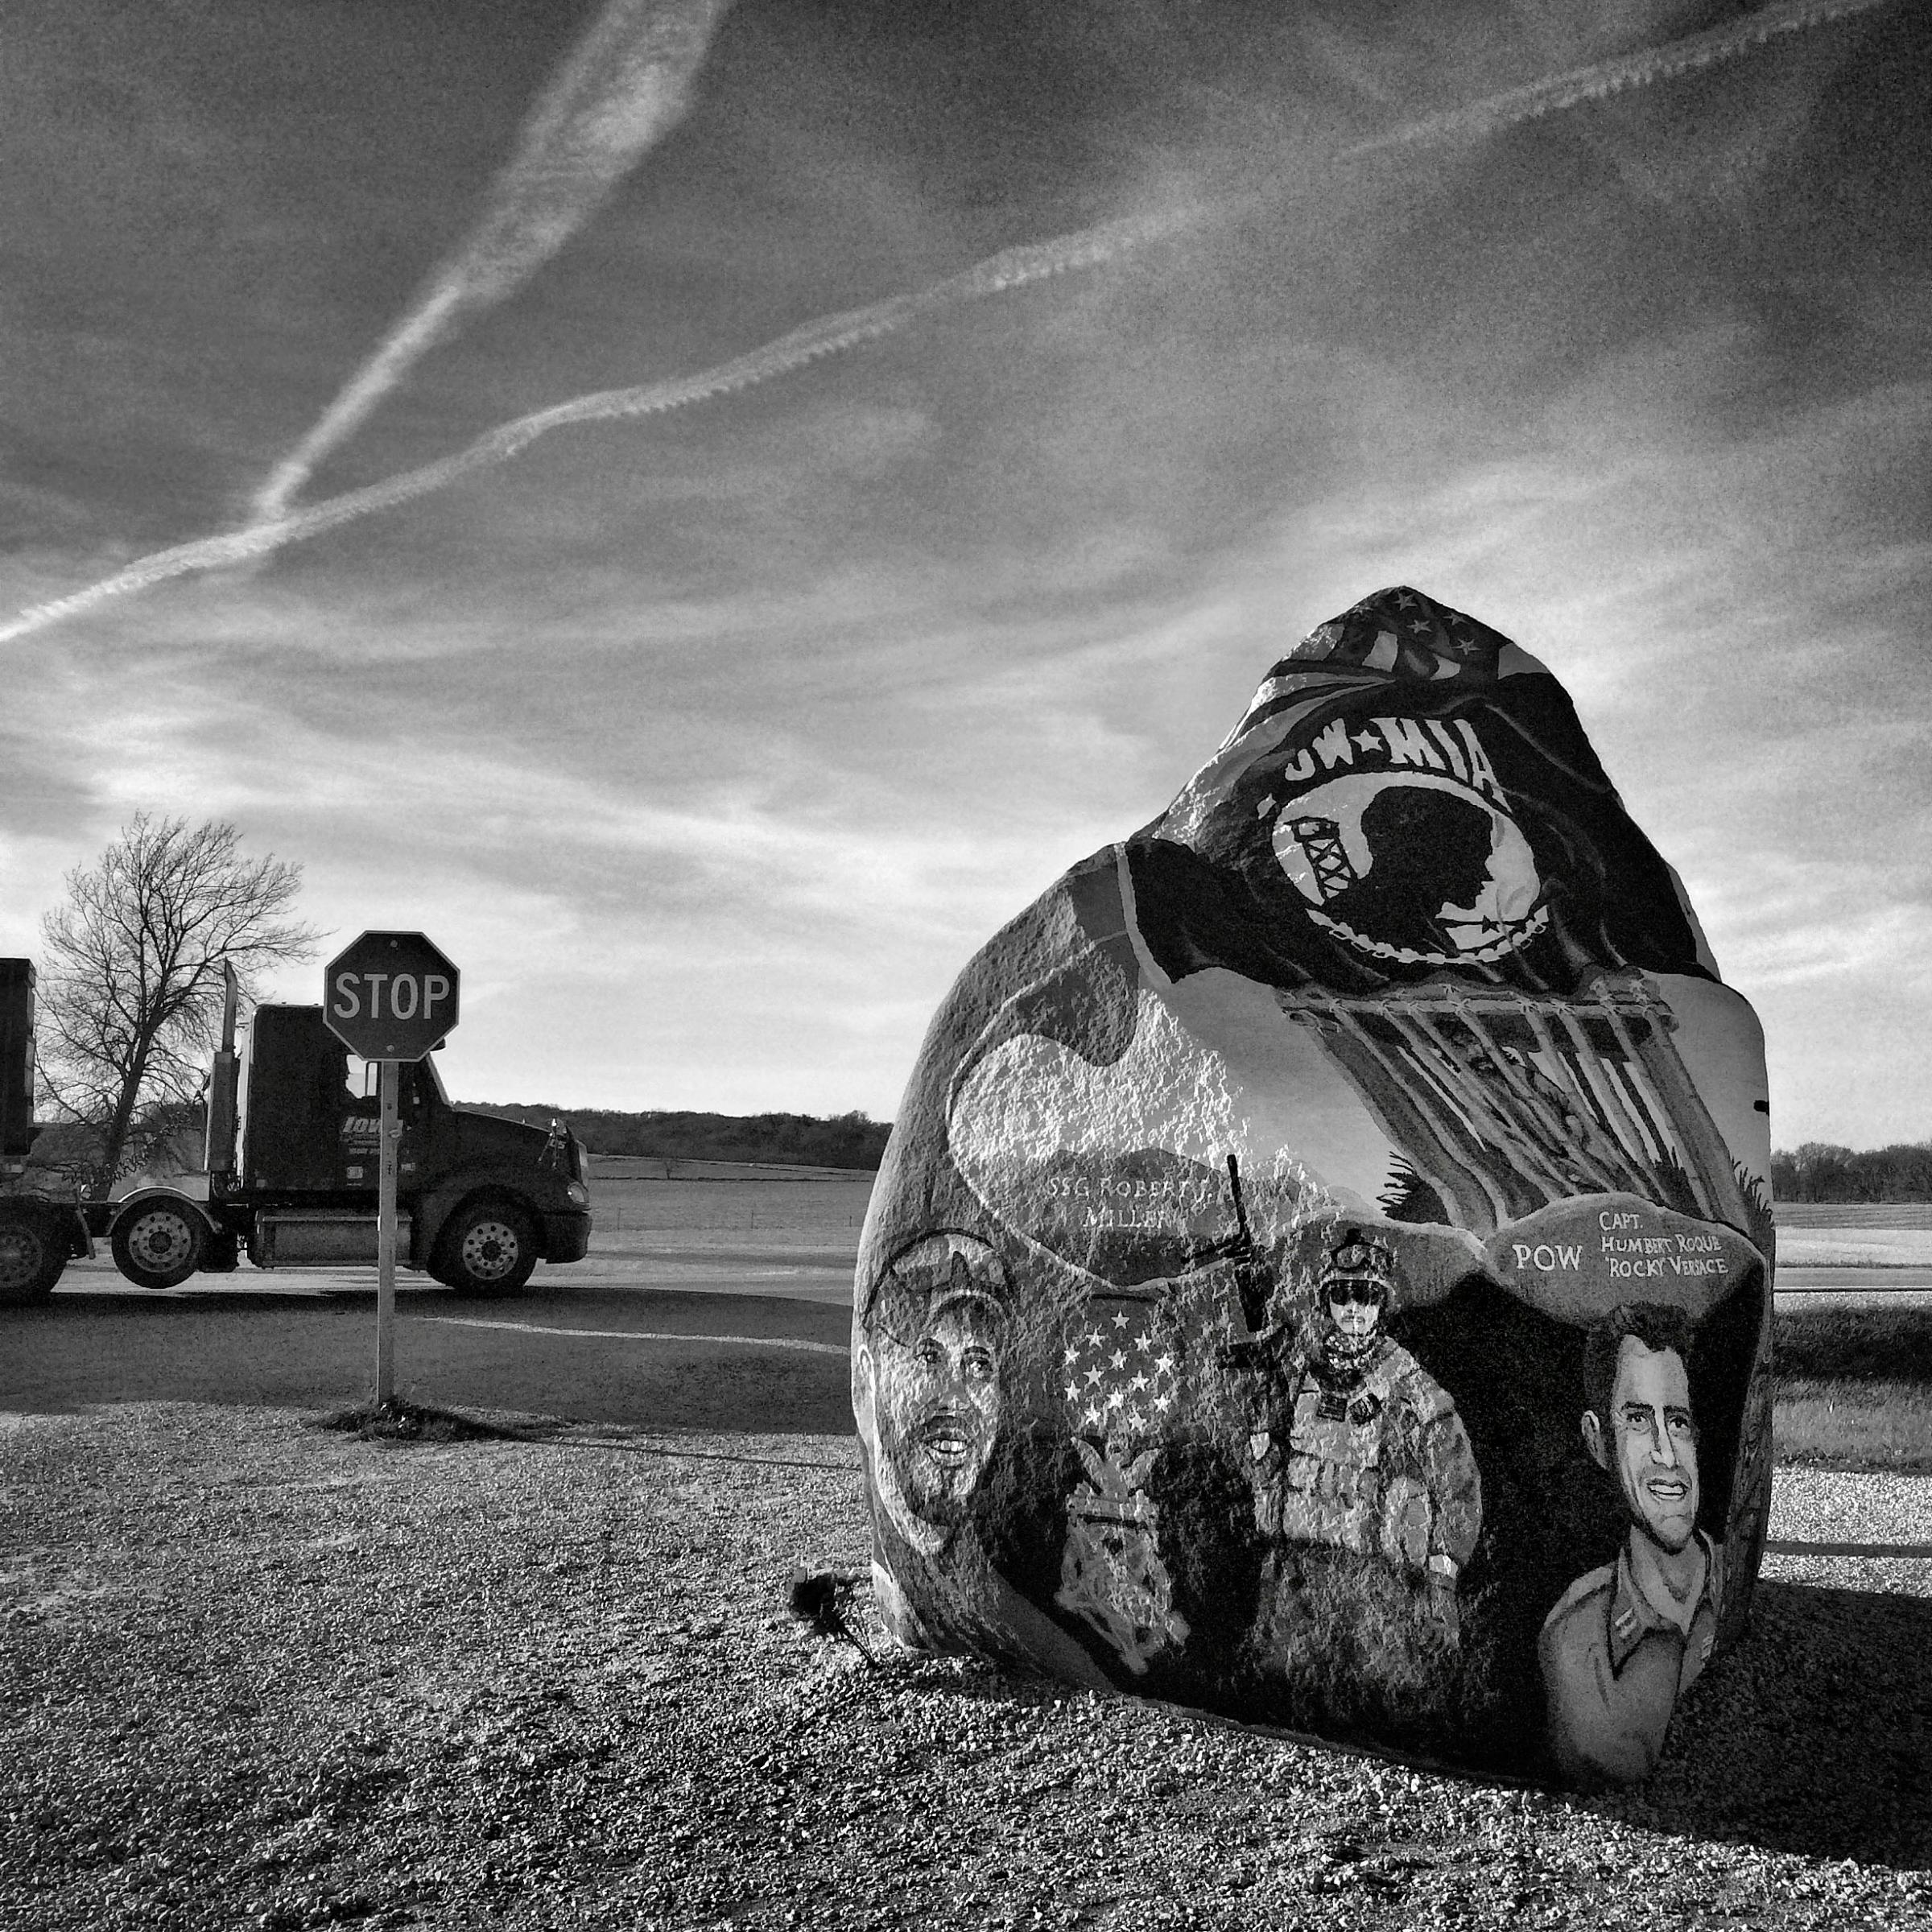 The "Freedom Rock" sits along a county road between Menlo and Greenfield, Iowa just south of Interstate 35 on Nov. 2, 2014. It's repainted every year by mural artist Ray "Bubba" Sorensen II with a different memorial message and a "Thank You" dedicated to U.S. Veterans.